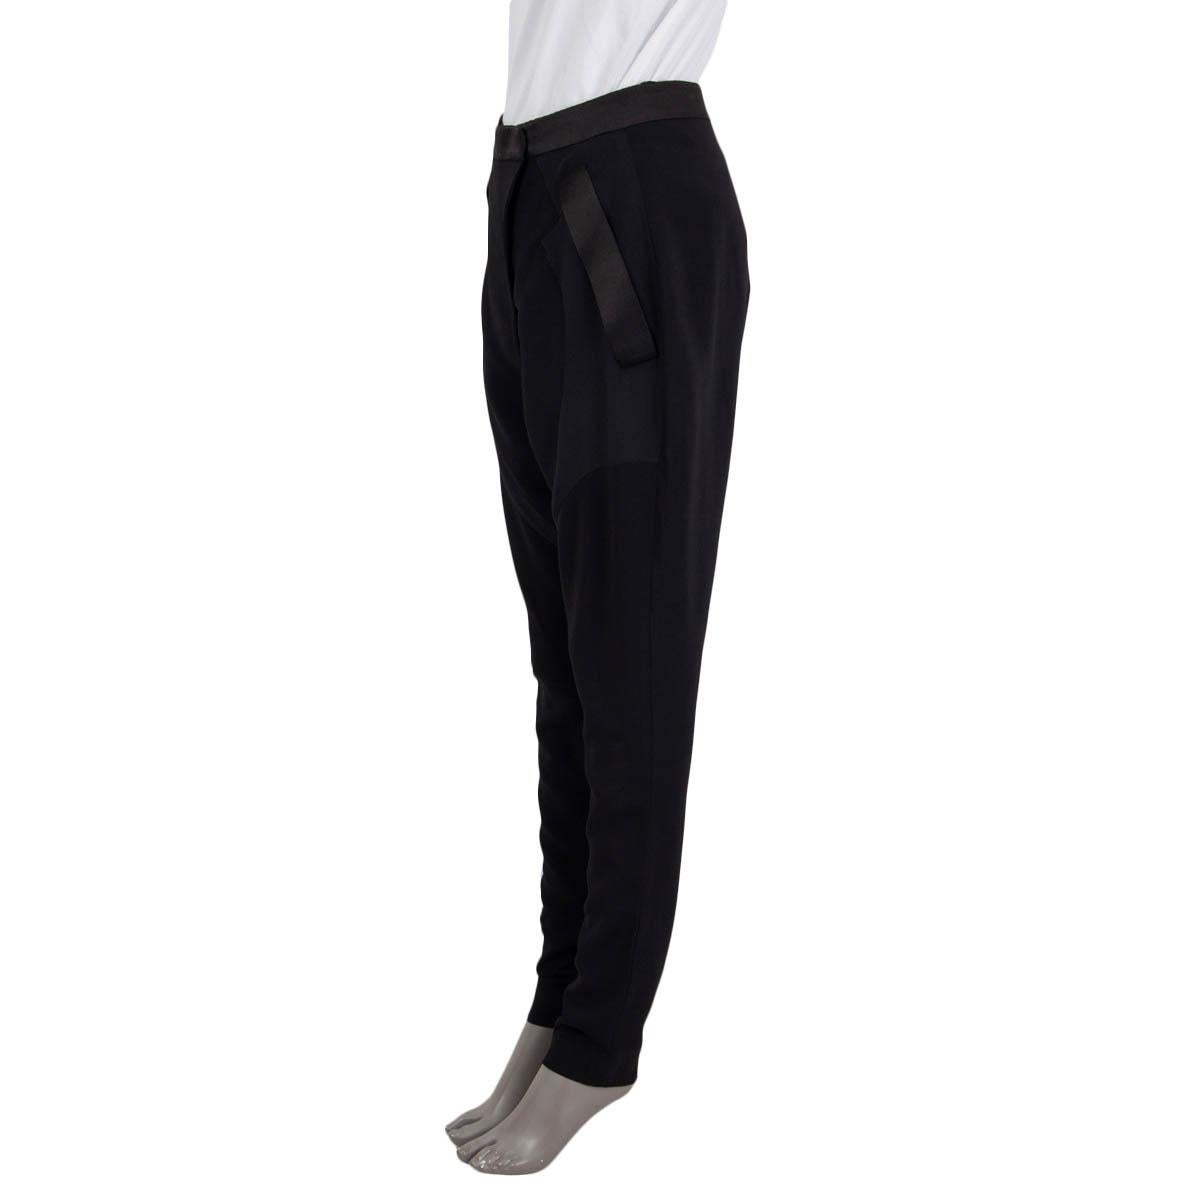 100% authentic Givenchy Equestrian Inspired Jodhpur Pants in black viscose (95%) and elastane (5%) with black satin details in silk (100%). The design has two slit pockets on the side zippers on the cuff featuring an asymmetric buttoned rise and